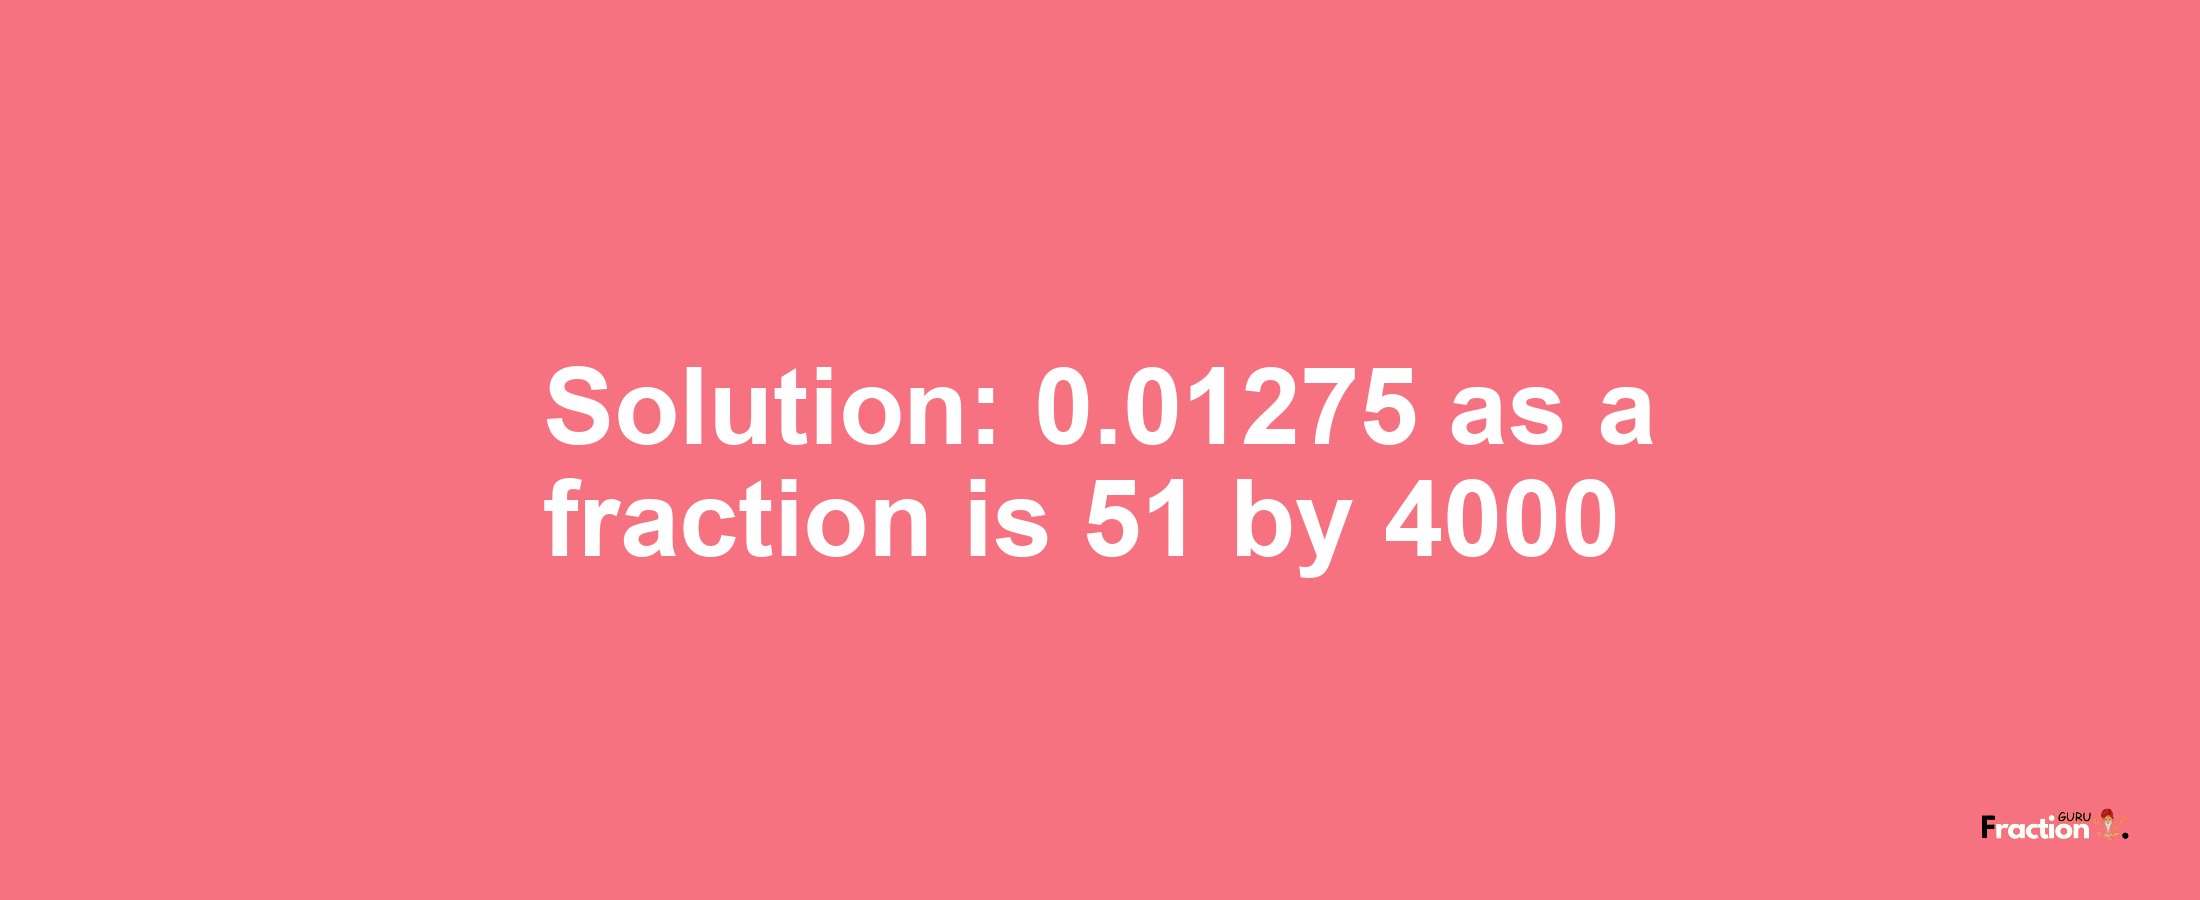 Solution:0.01275 as a fraction is 51/4000